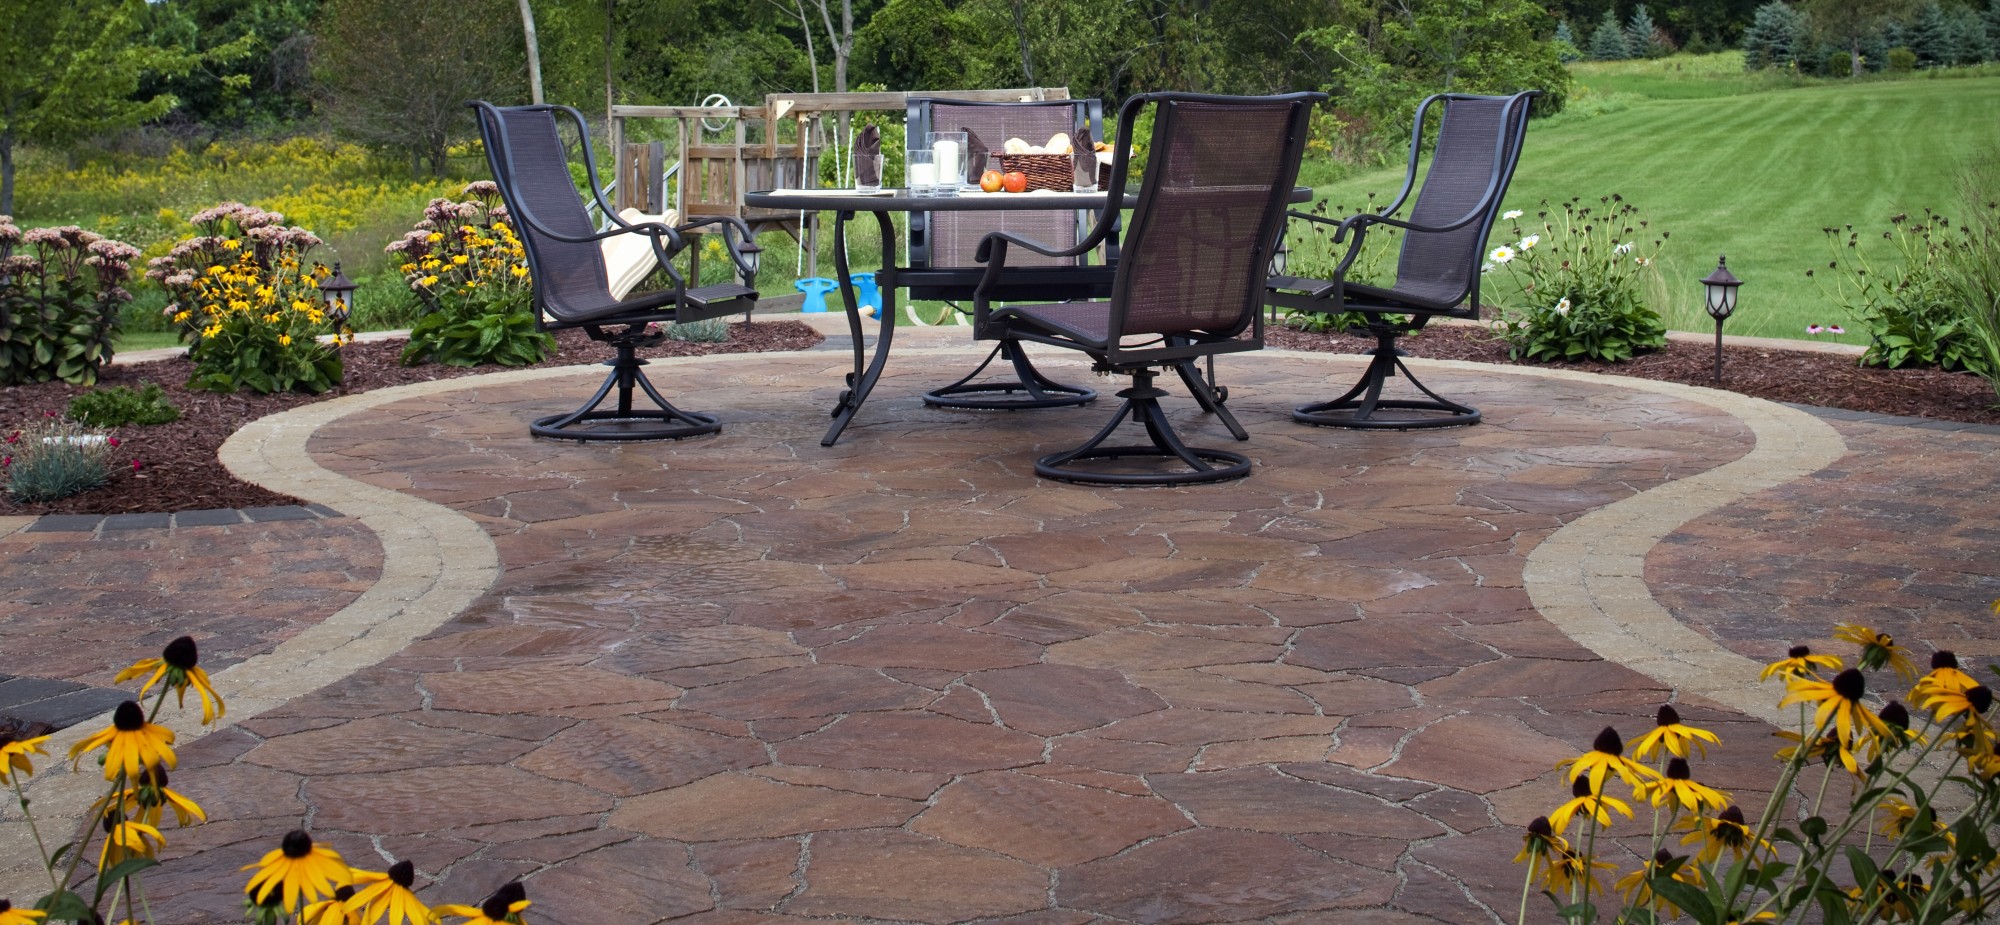 A paver patio with outdoor furniture